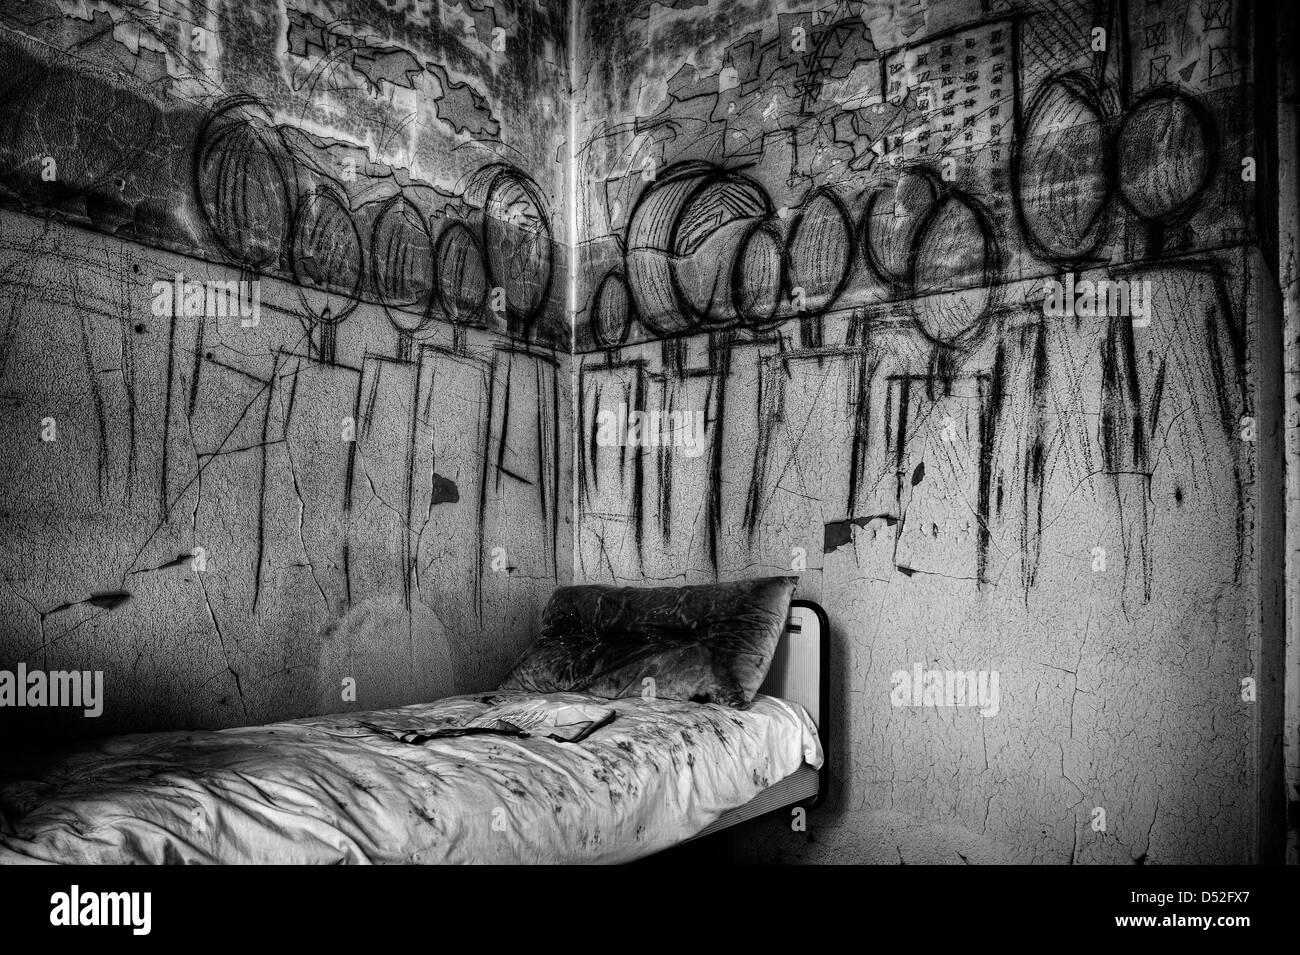 Italy. Abandoned psychiatric hospital. Mural with materialized nightmares Stock Photo